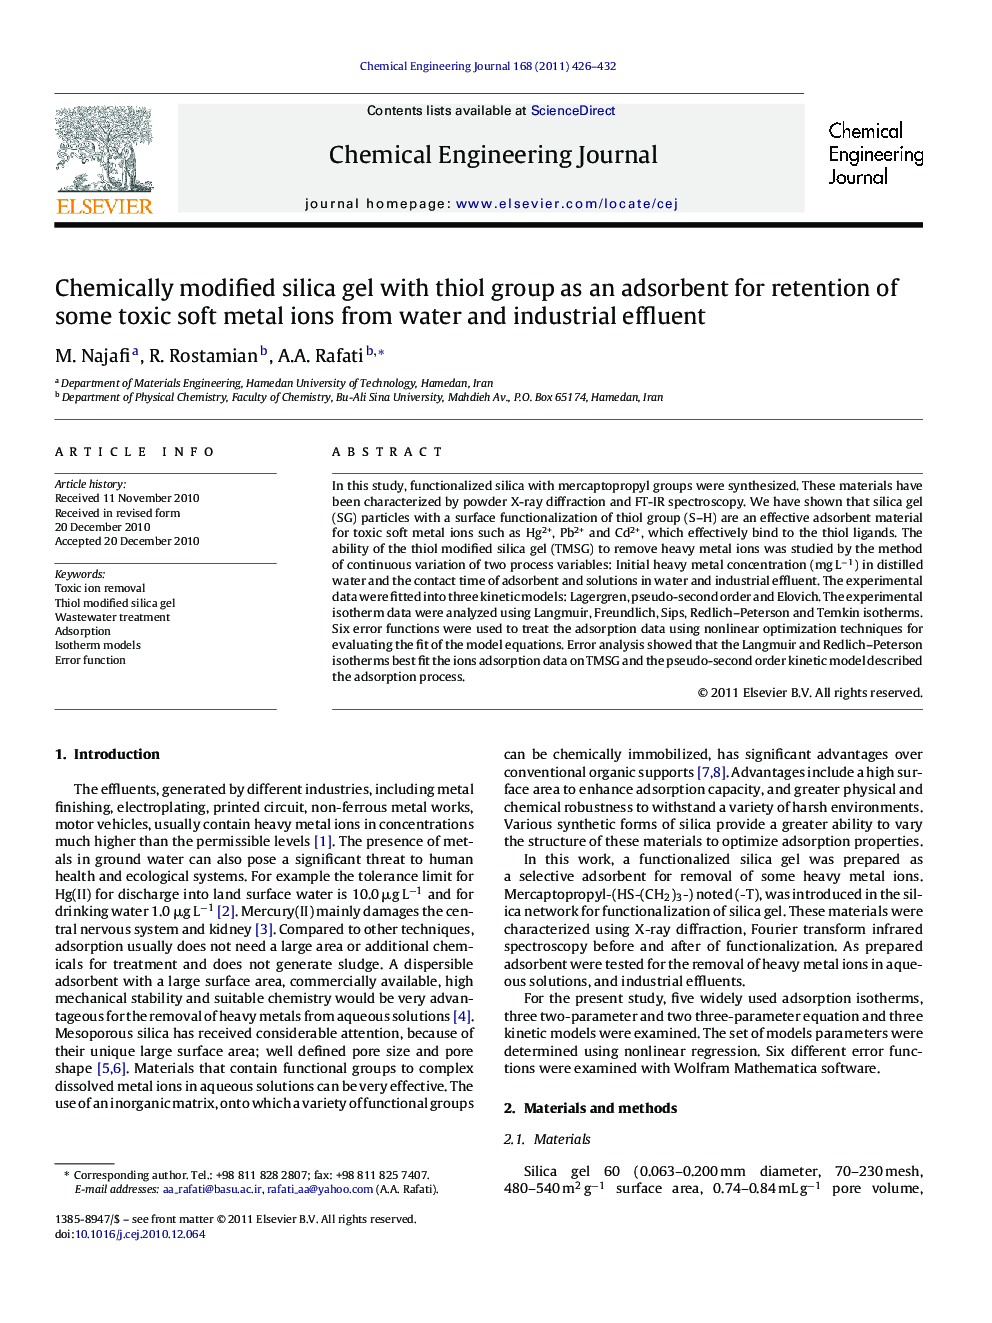 Chemically modified silica gel with thiol group as an adsorbent for retention of some toxic soft metal ions from water and industrial effluent